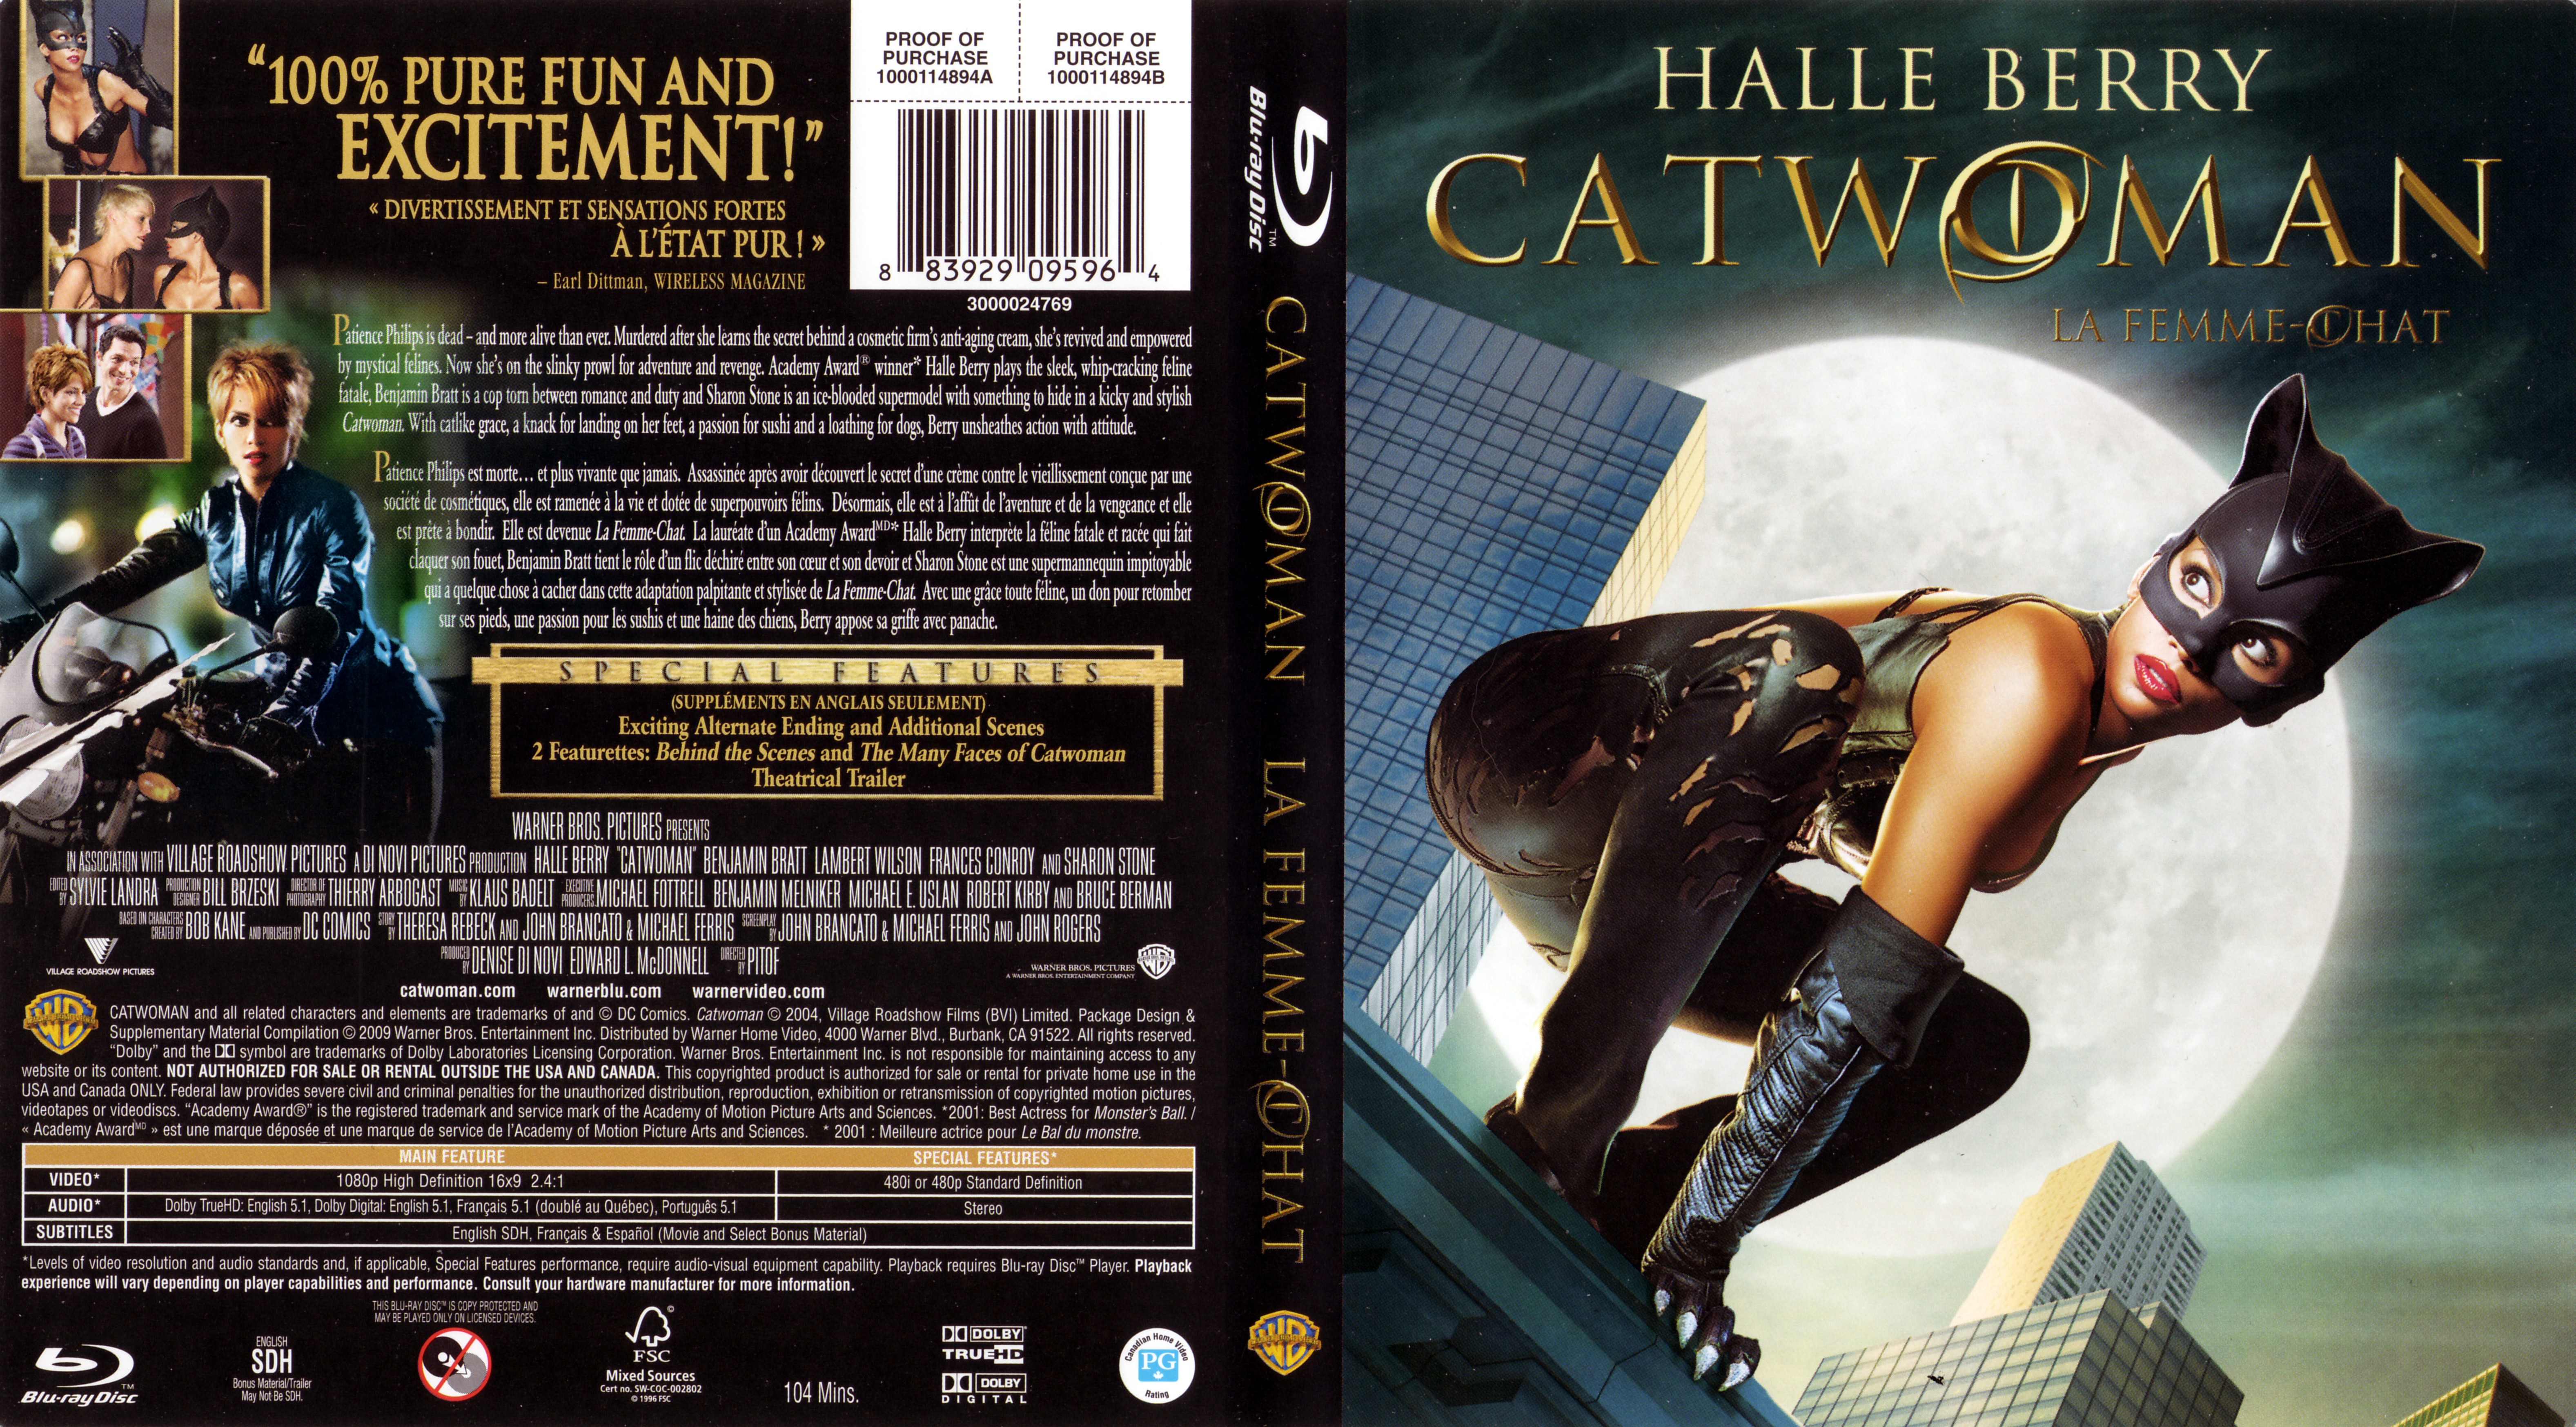 Jaquette DVD Catwoman - La Femme Chat (Canadienne) (BLU-RAY)